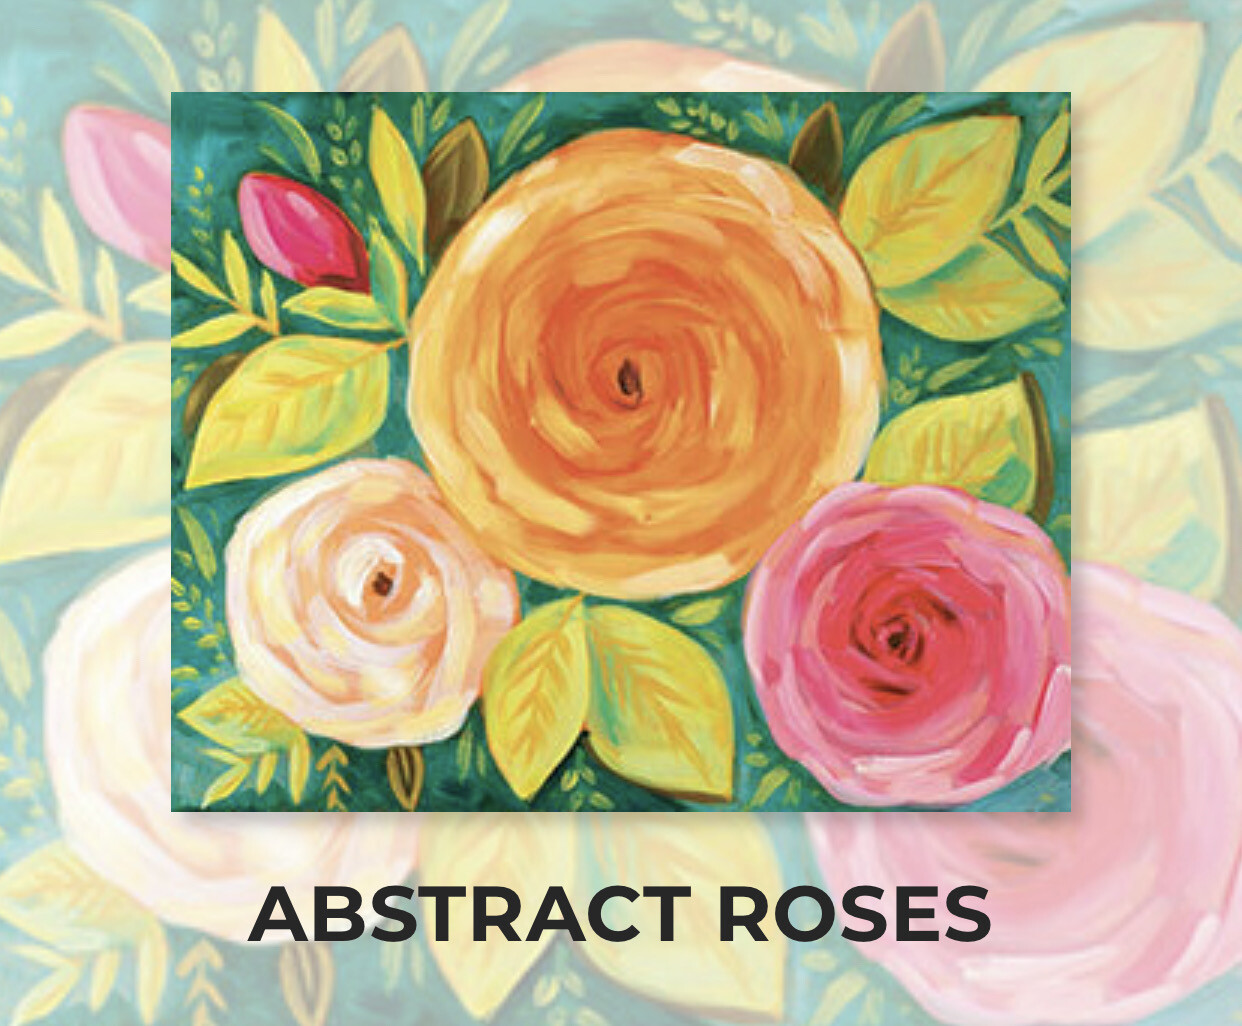 Abstract Roses ADULT Acrylic Paint On Canvas DIY Art Kit - 3 Week Special Order